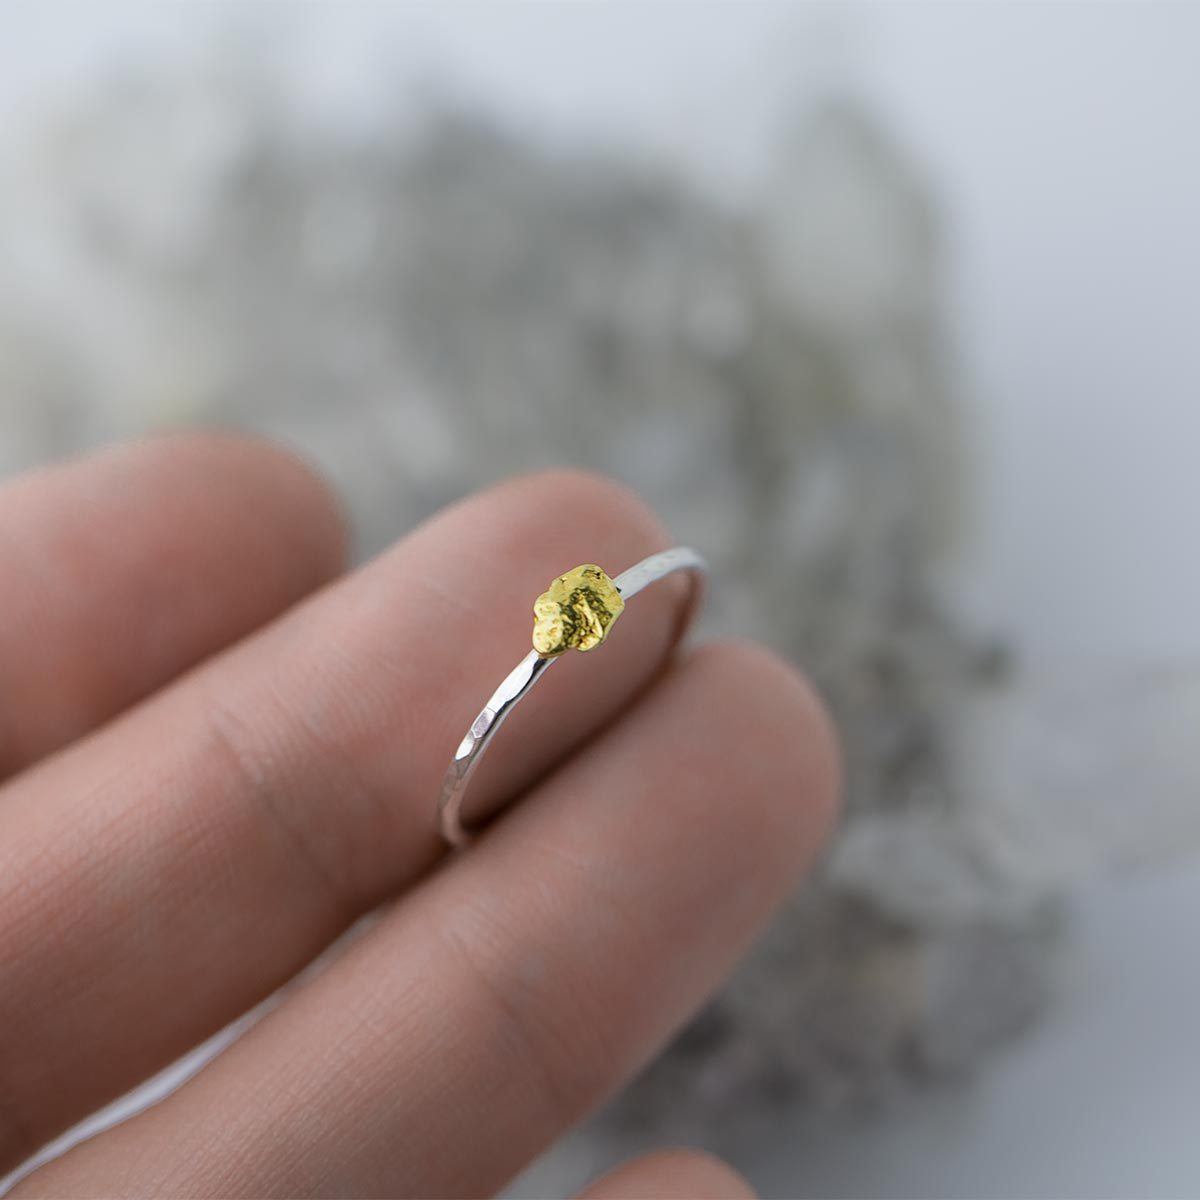 Alaska Gold Nugget &amp; Sterling Silver Ring - Handmade Jewelry by Burnish